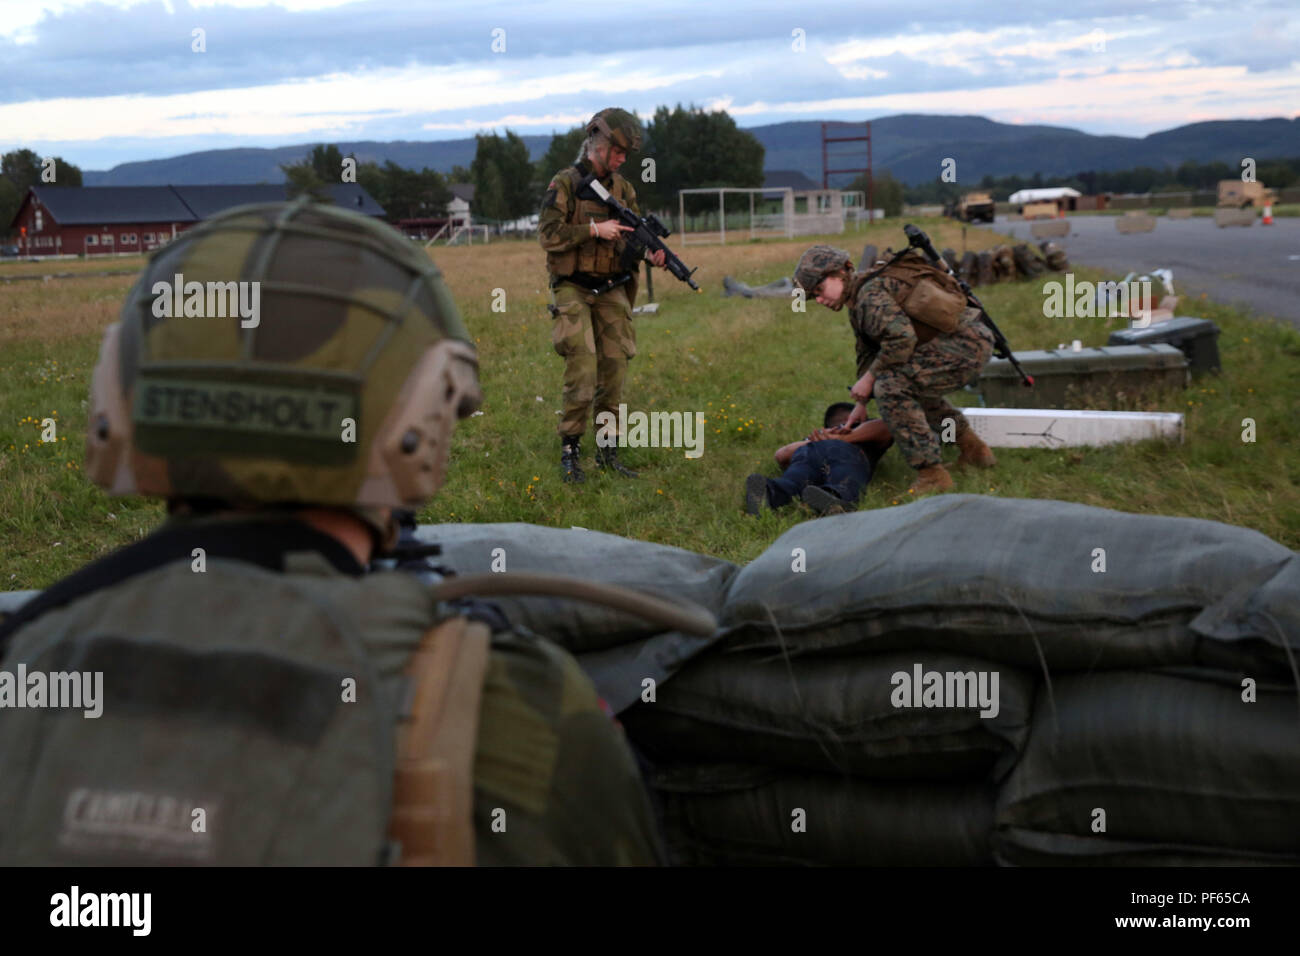 U.S. Marines with Marine Rotational Force-Europe 18.1 detain an uncooperative role-player during a multinational law enforcement exercise in Vaernes Garnison, Norway, Aug. 14, 2018. Service members practiced vehicle control and entry control point procedures used to identify and search vehicles and personnel entering a military installation. The training, conducted by U.S. Marines with Marine Rotational Force-Europe 18.1, taught American, Norwegian and British military members how to properly set up and execute the checkpoints. (U.S. Marine Corps photo by Cpl. Gloria Lepko/Released) Stock Photo